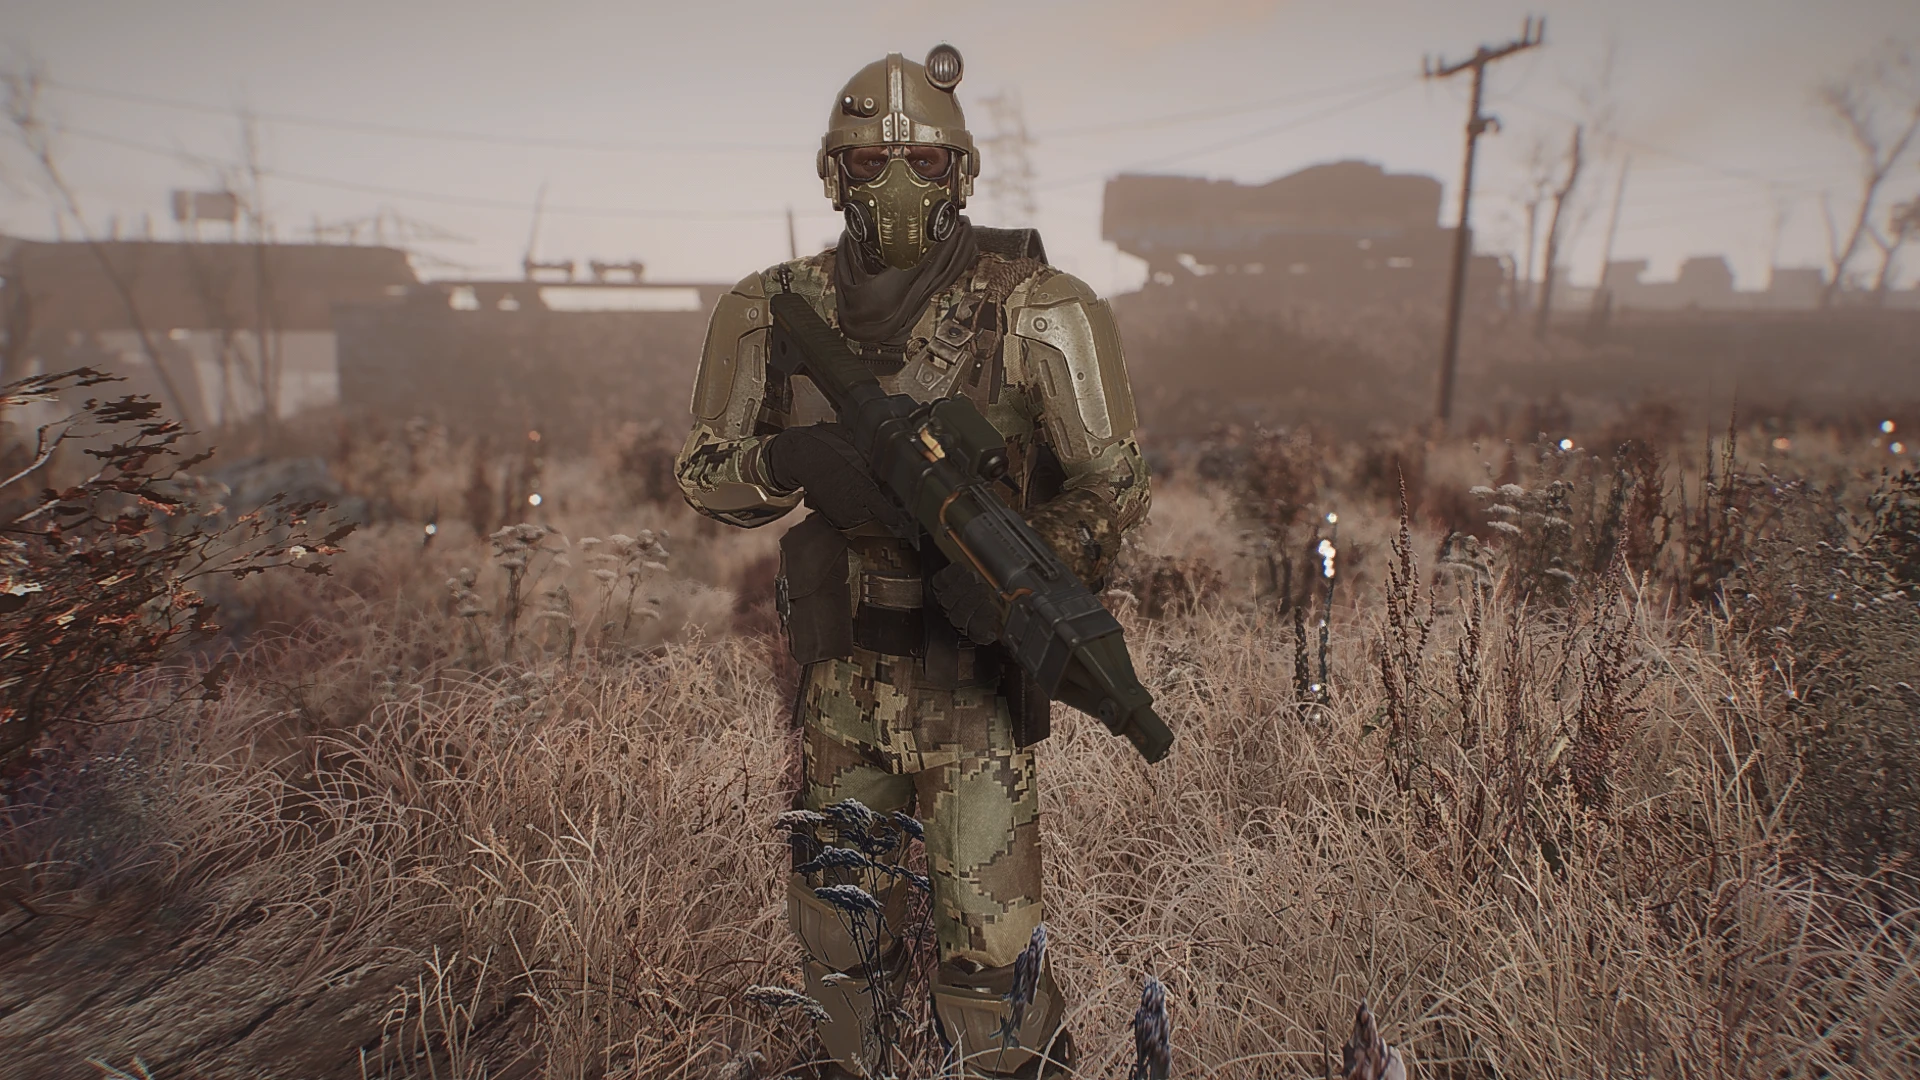 Fallout 4 modern weapons mod for xbox one